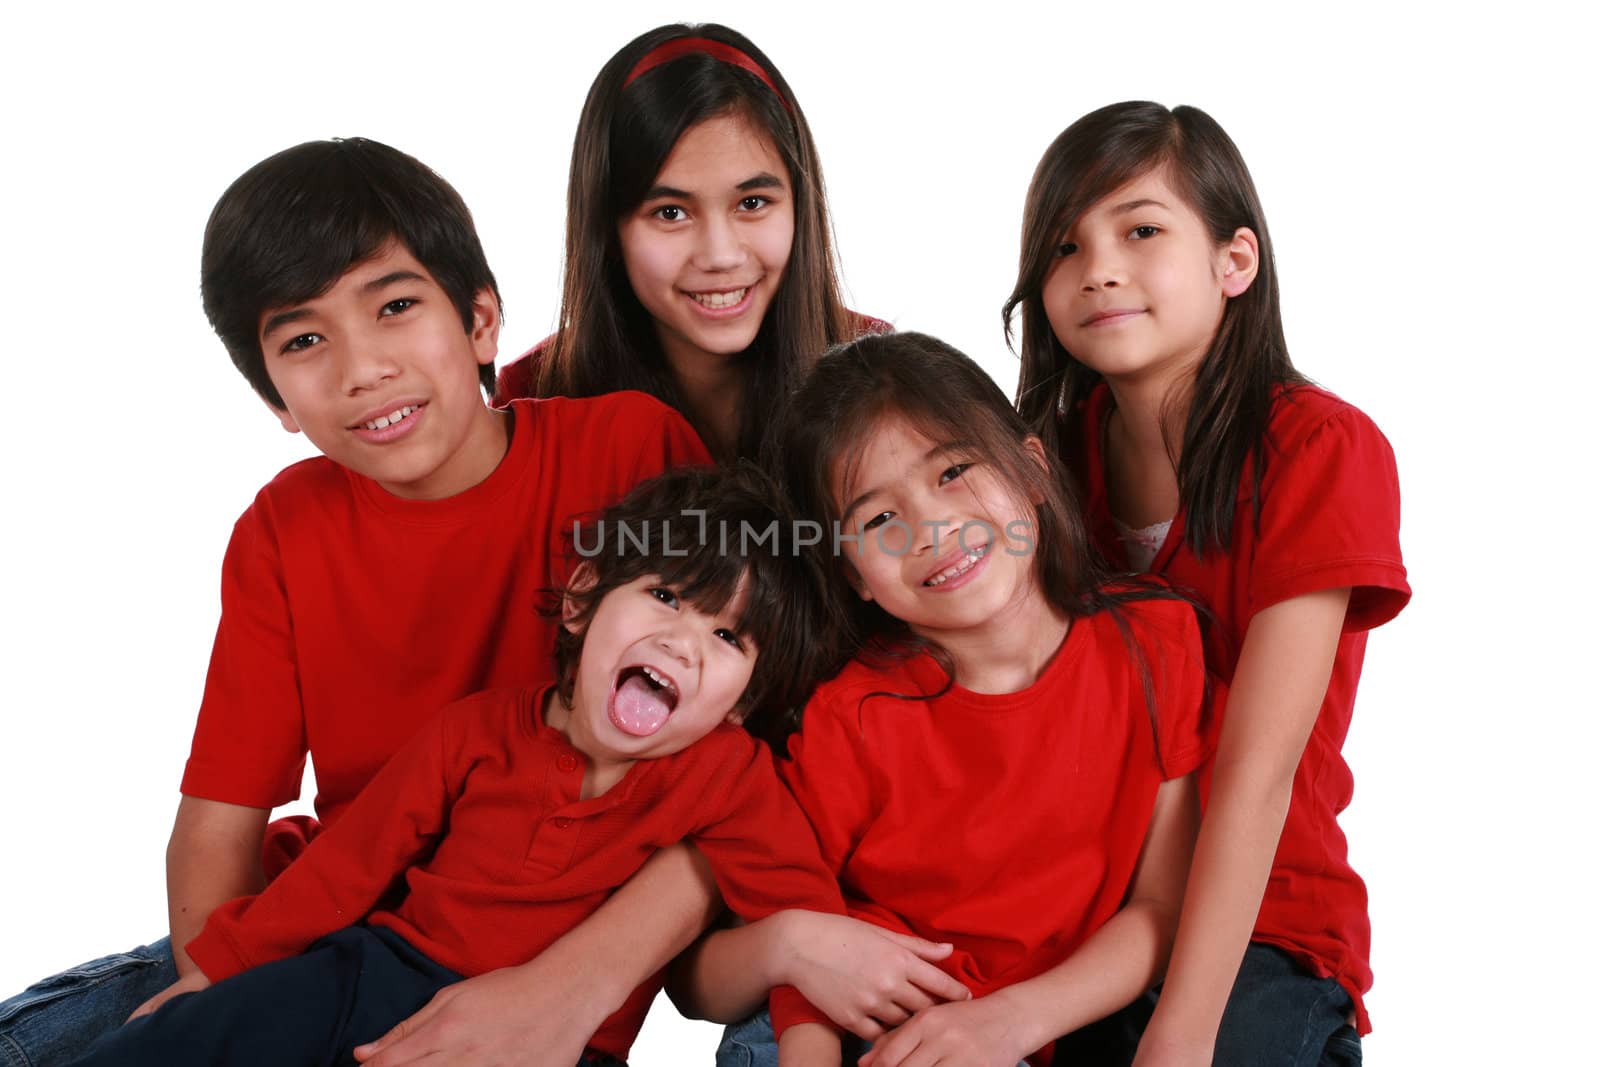 Five siblings with red shirts isolated on white